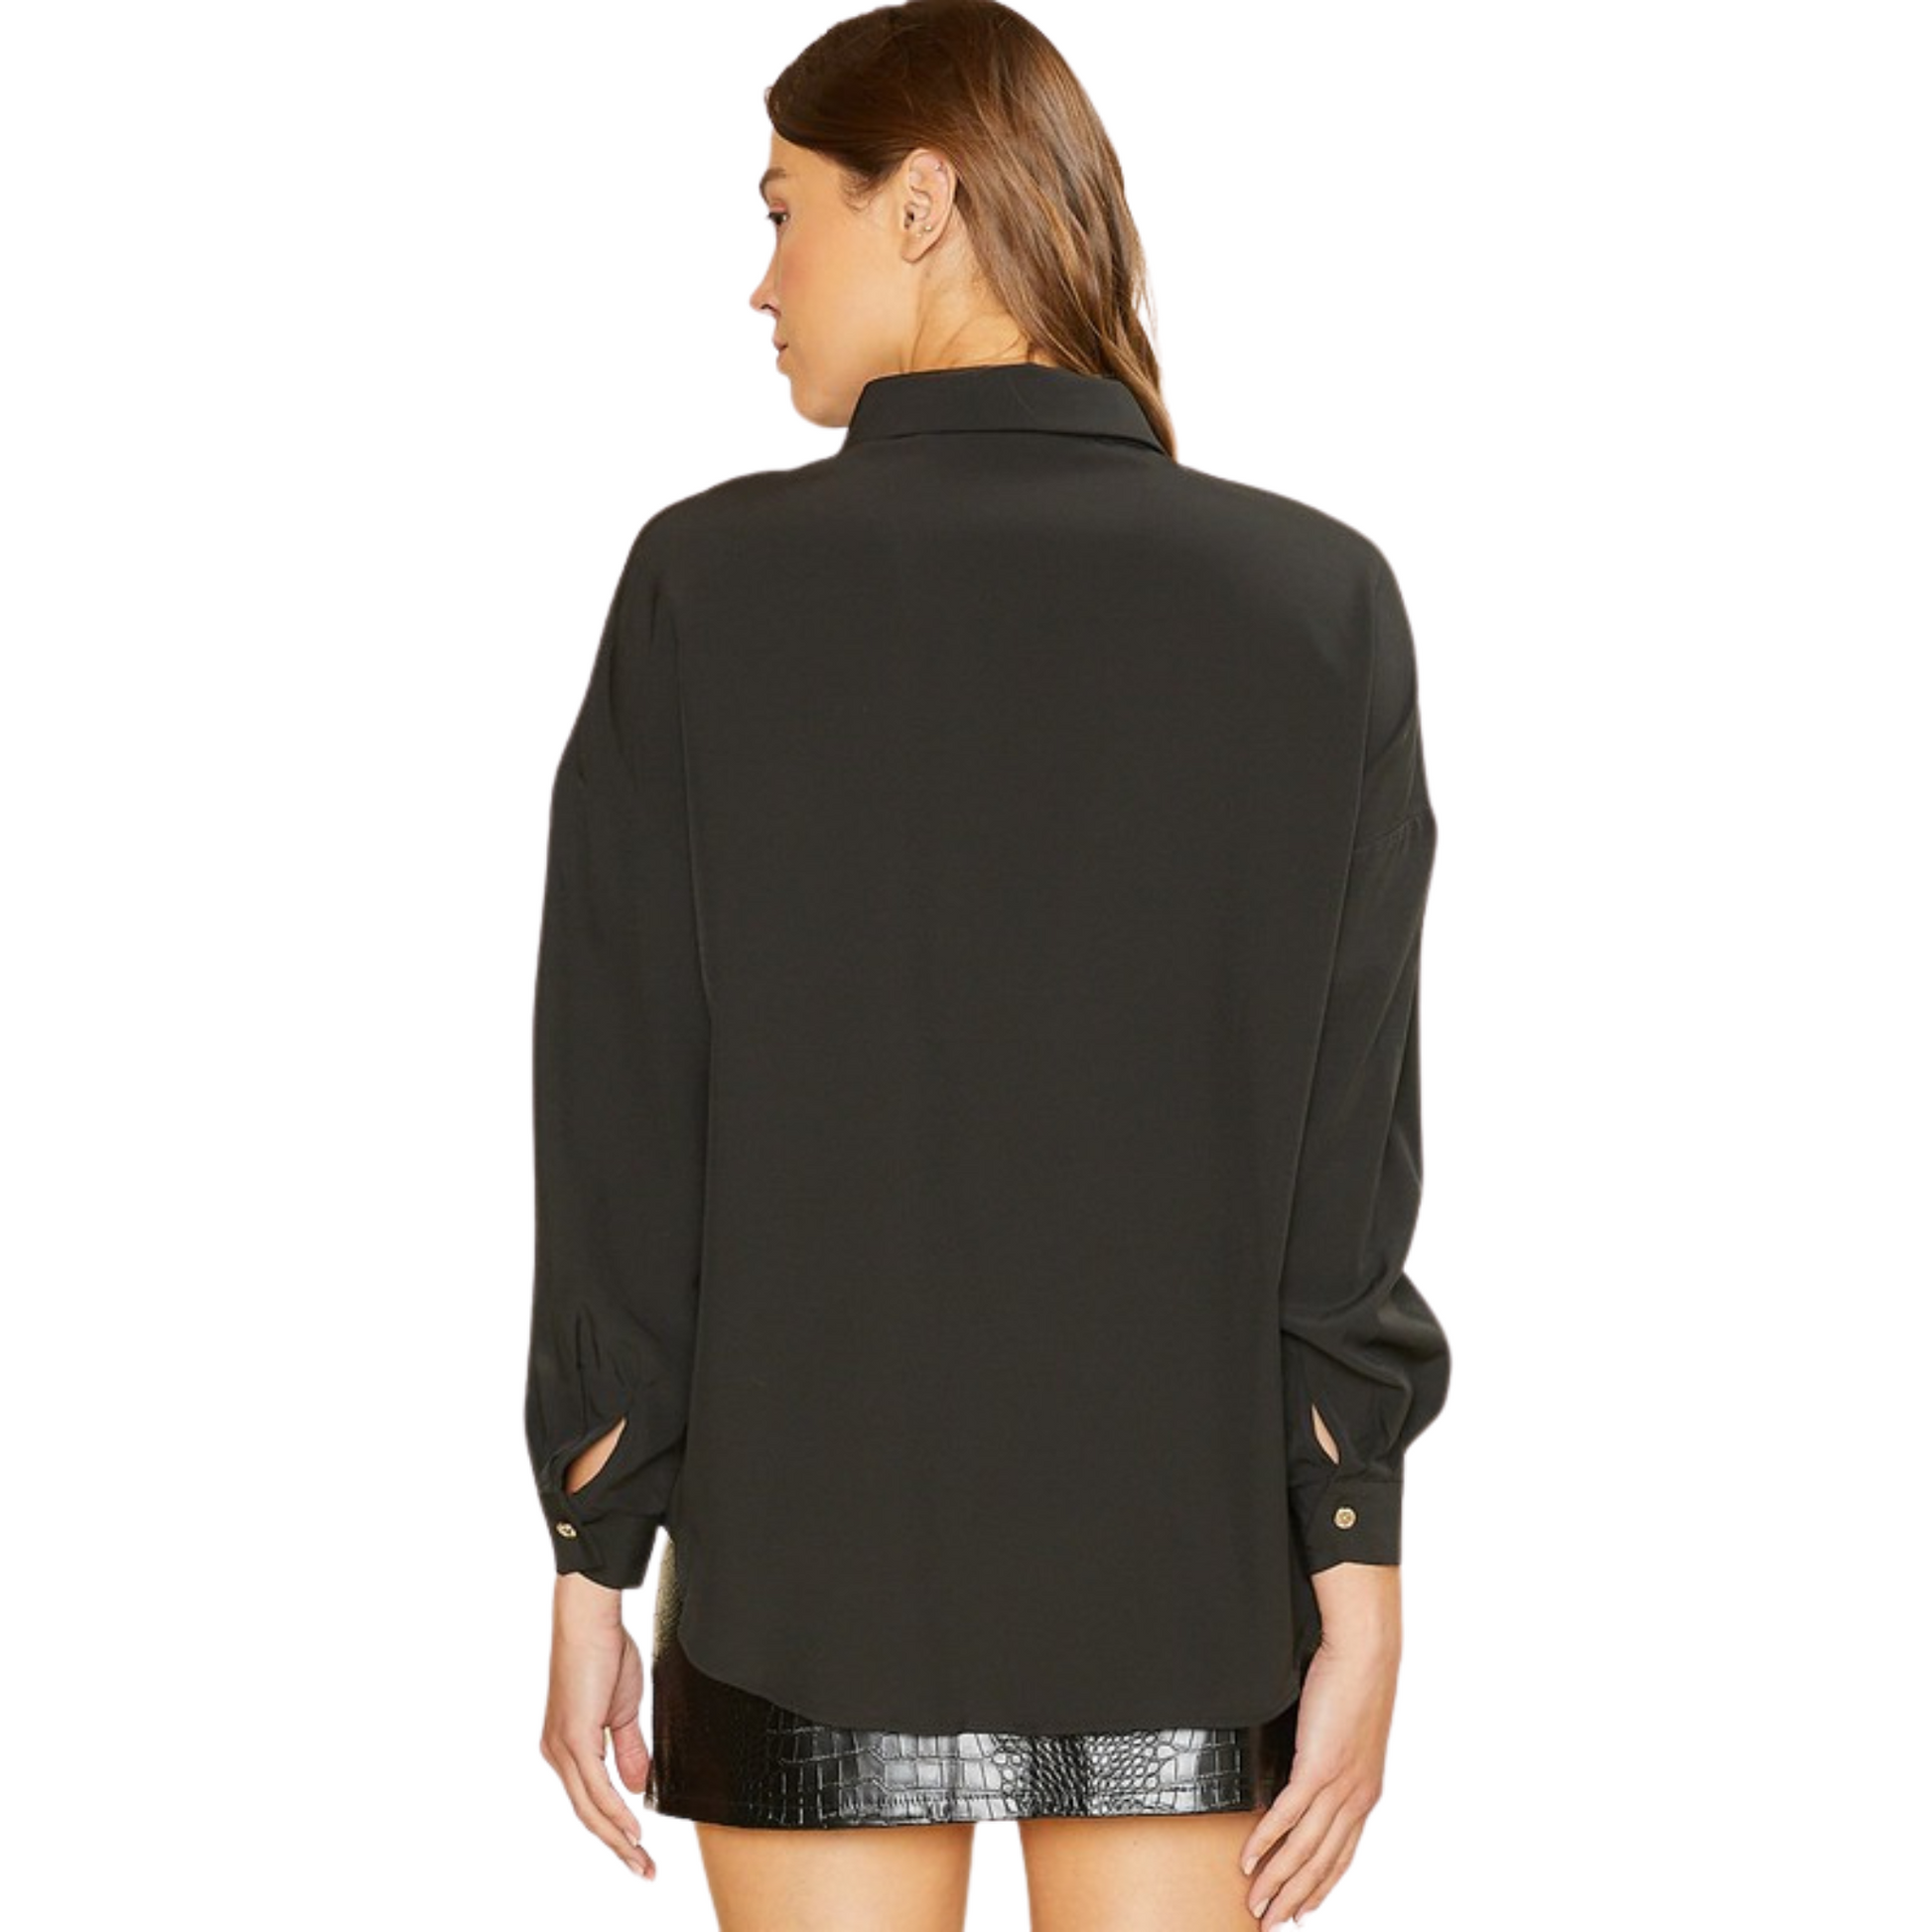 This black Rhinestone Fringe Trim Blouse features an elegant fringe with embedded rhinestones and long sleeves. The button-up design ensures a secure and flattering fit, making it the perfect piece for formal occasions.